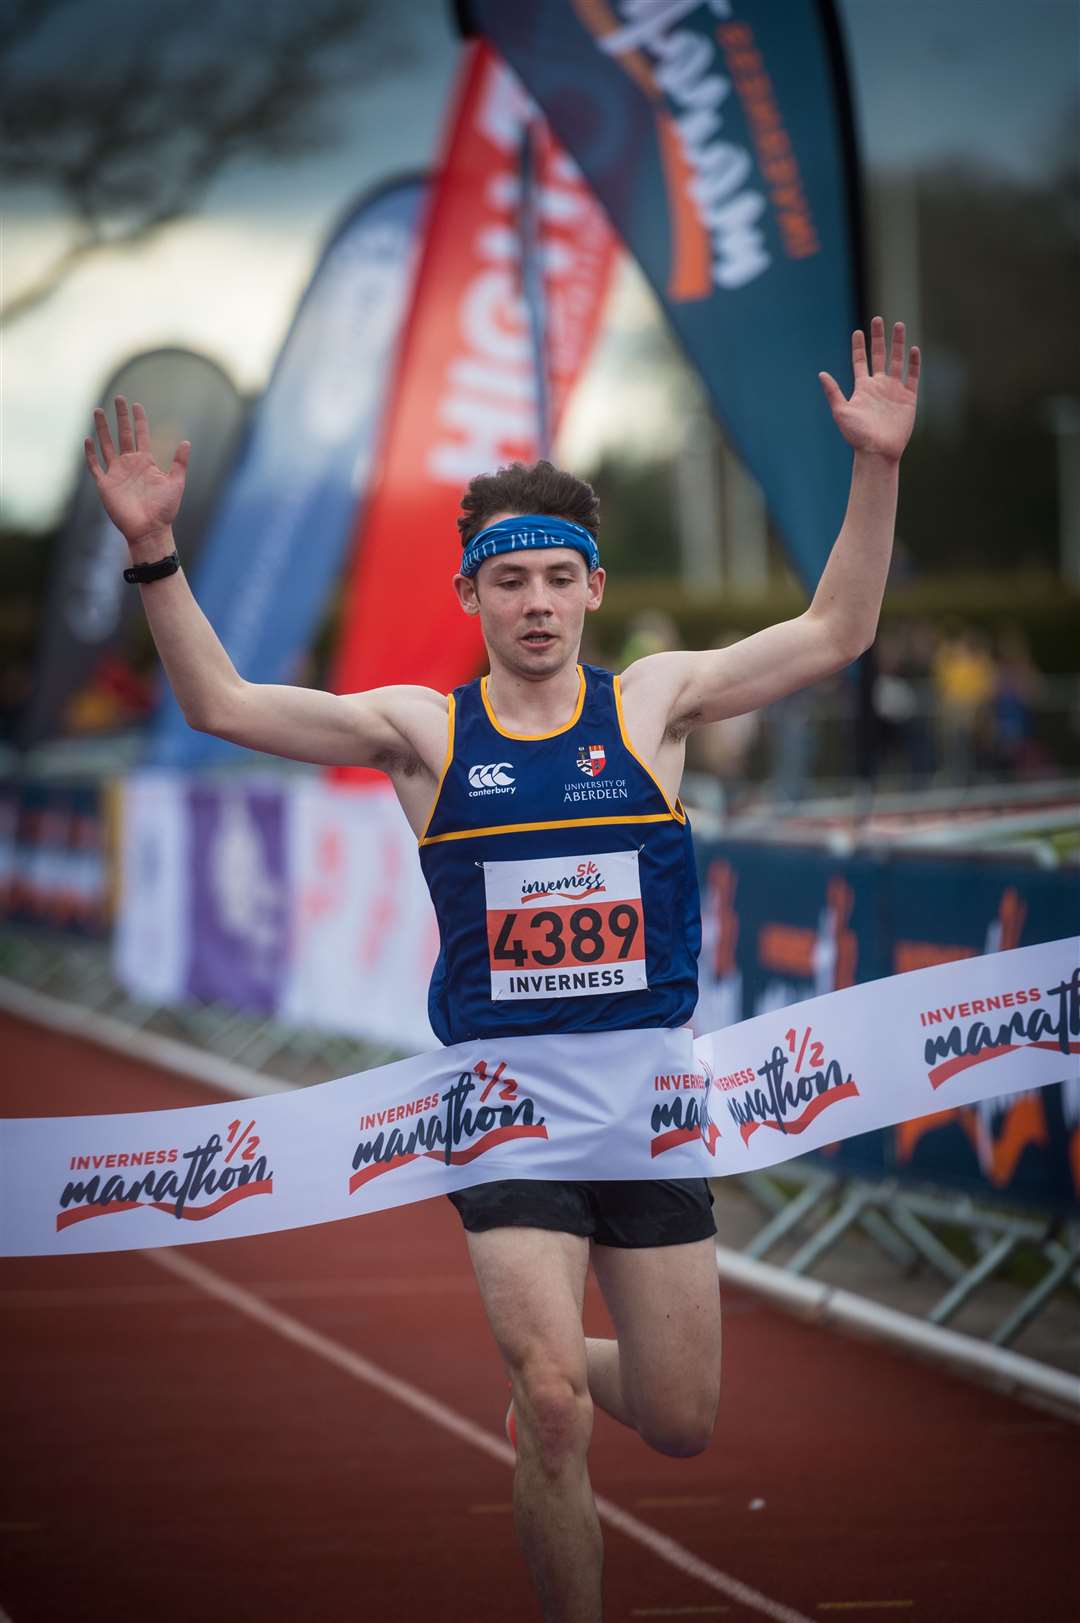 Medicine student claims victory on his debut at Inverness 5k